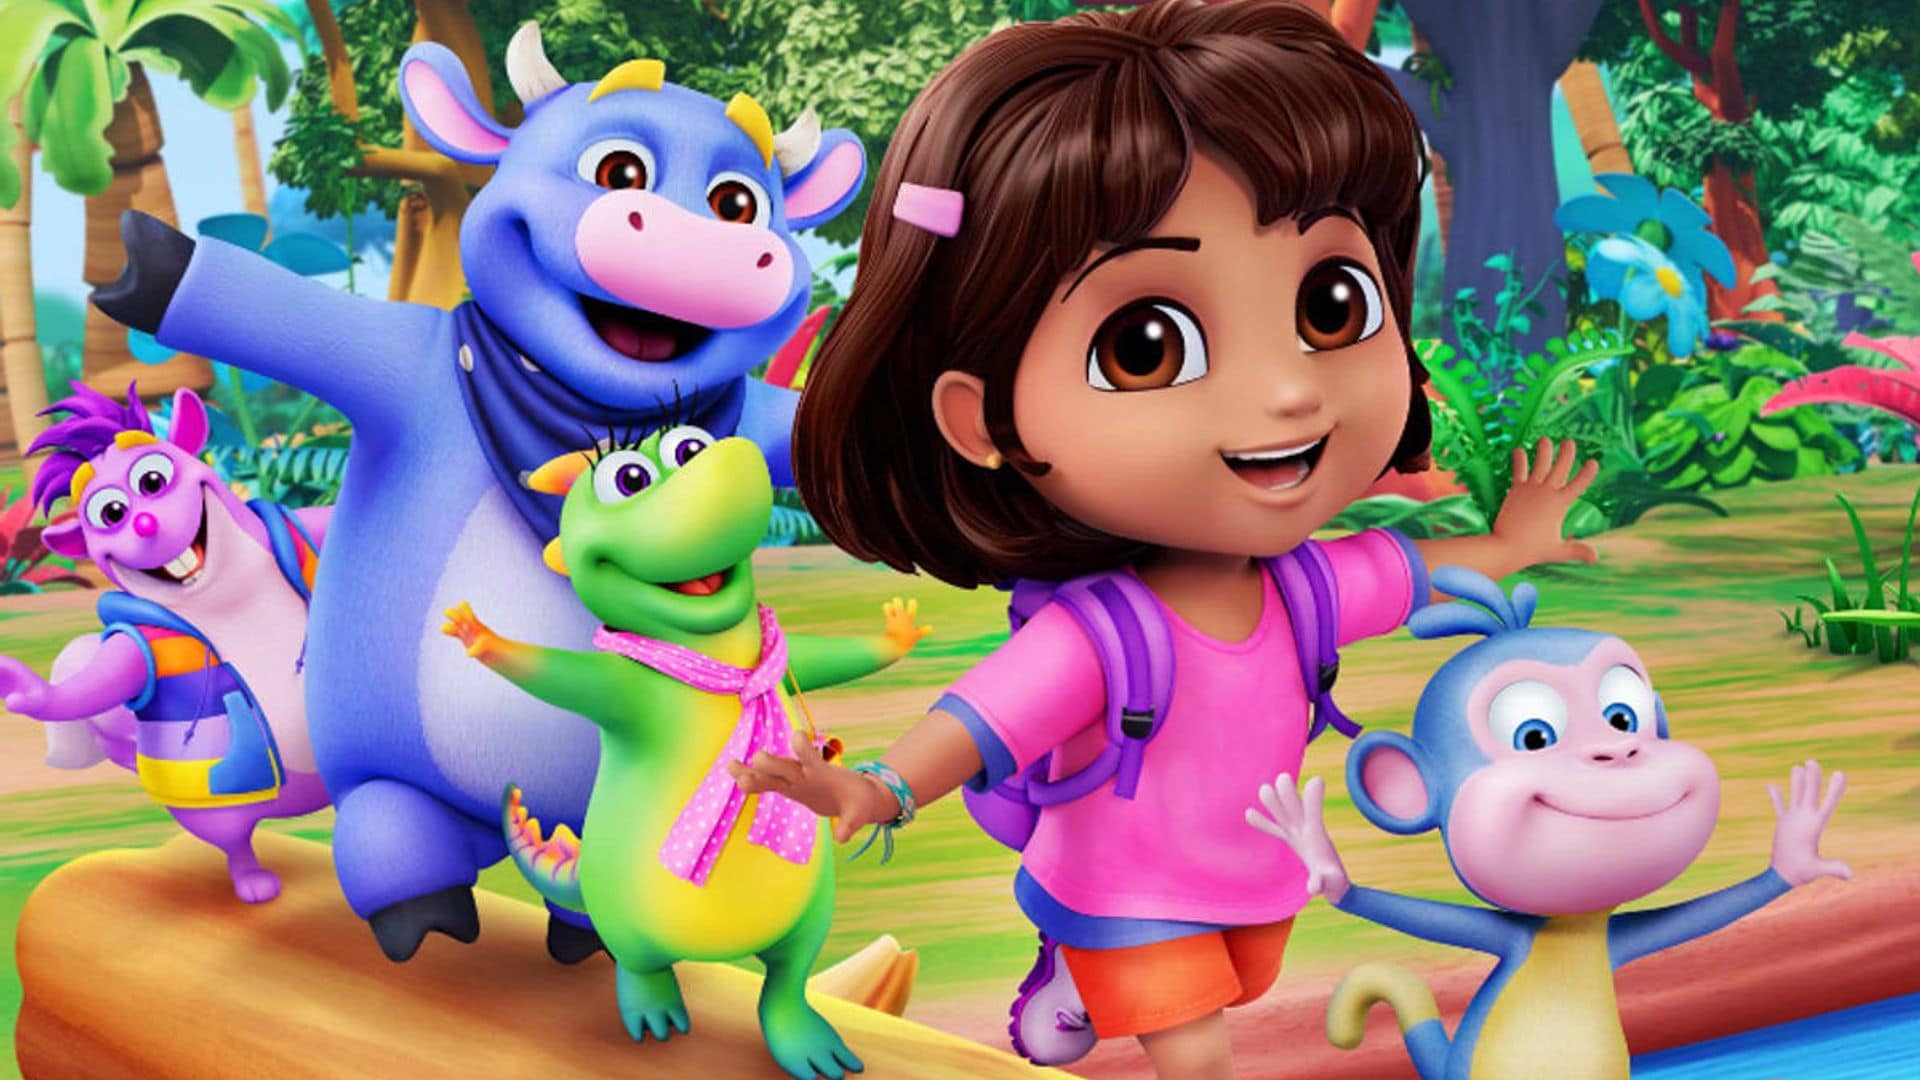 EXCLUSIVE: Dora the Explorer is back with a new look, new songs, and more fun